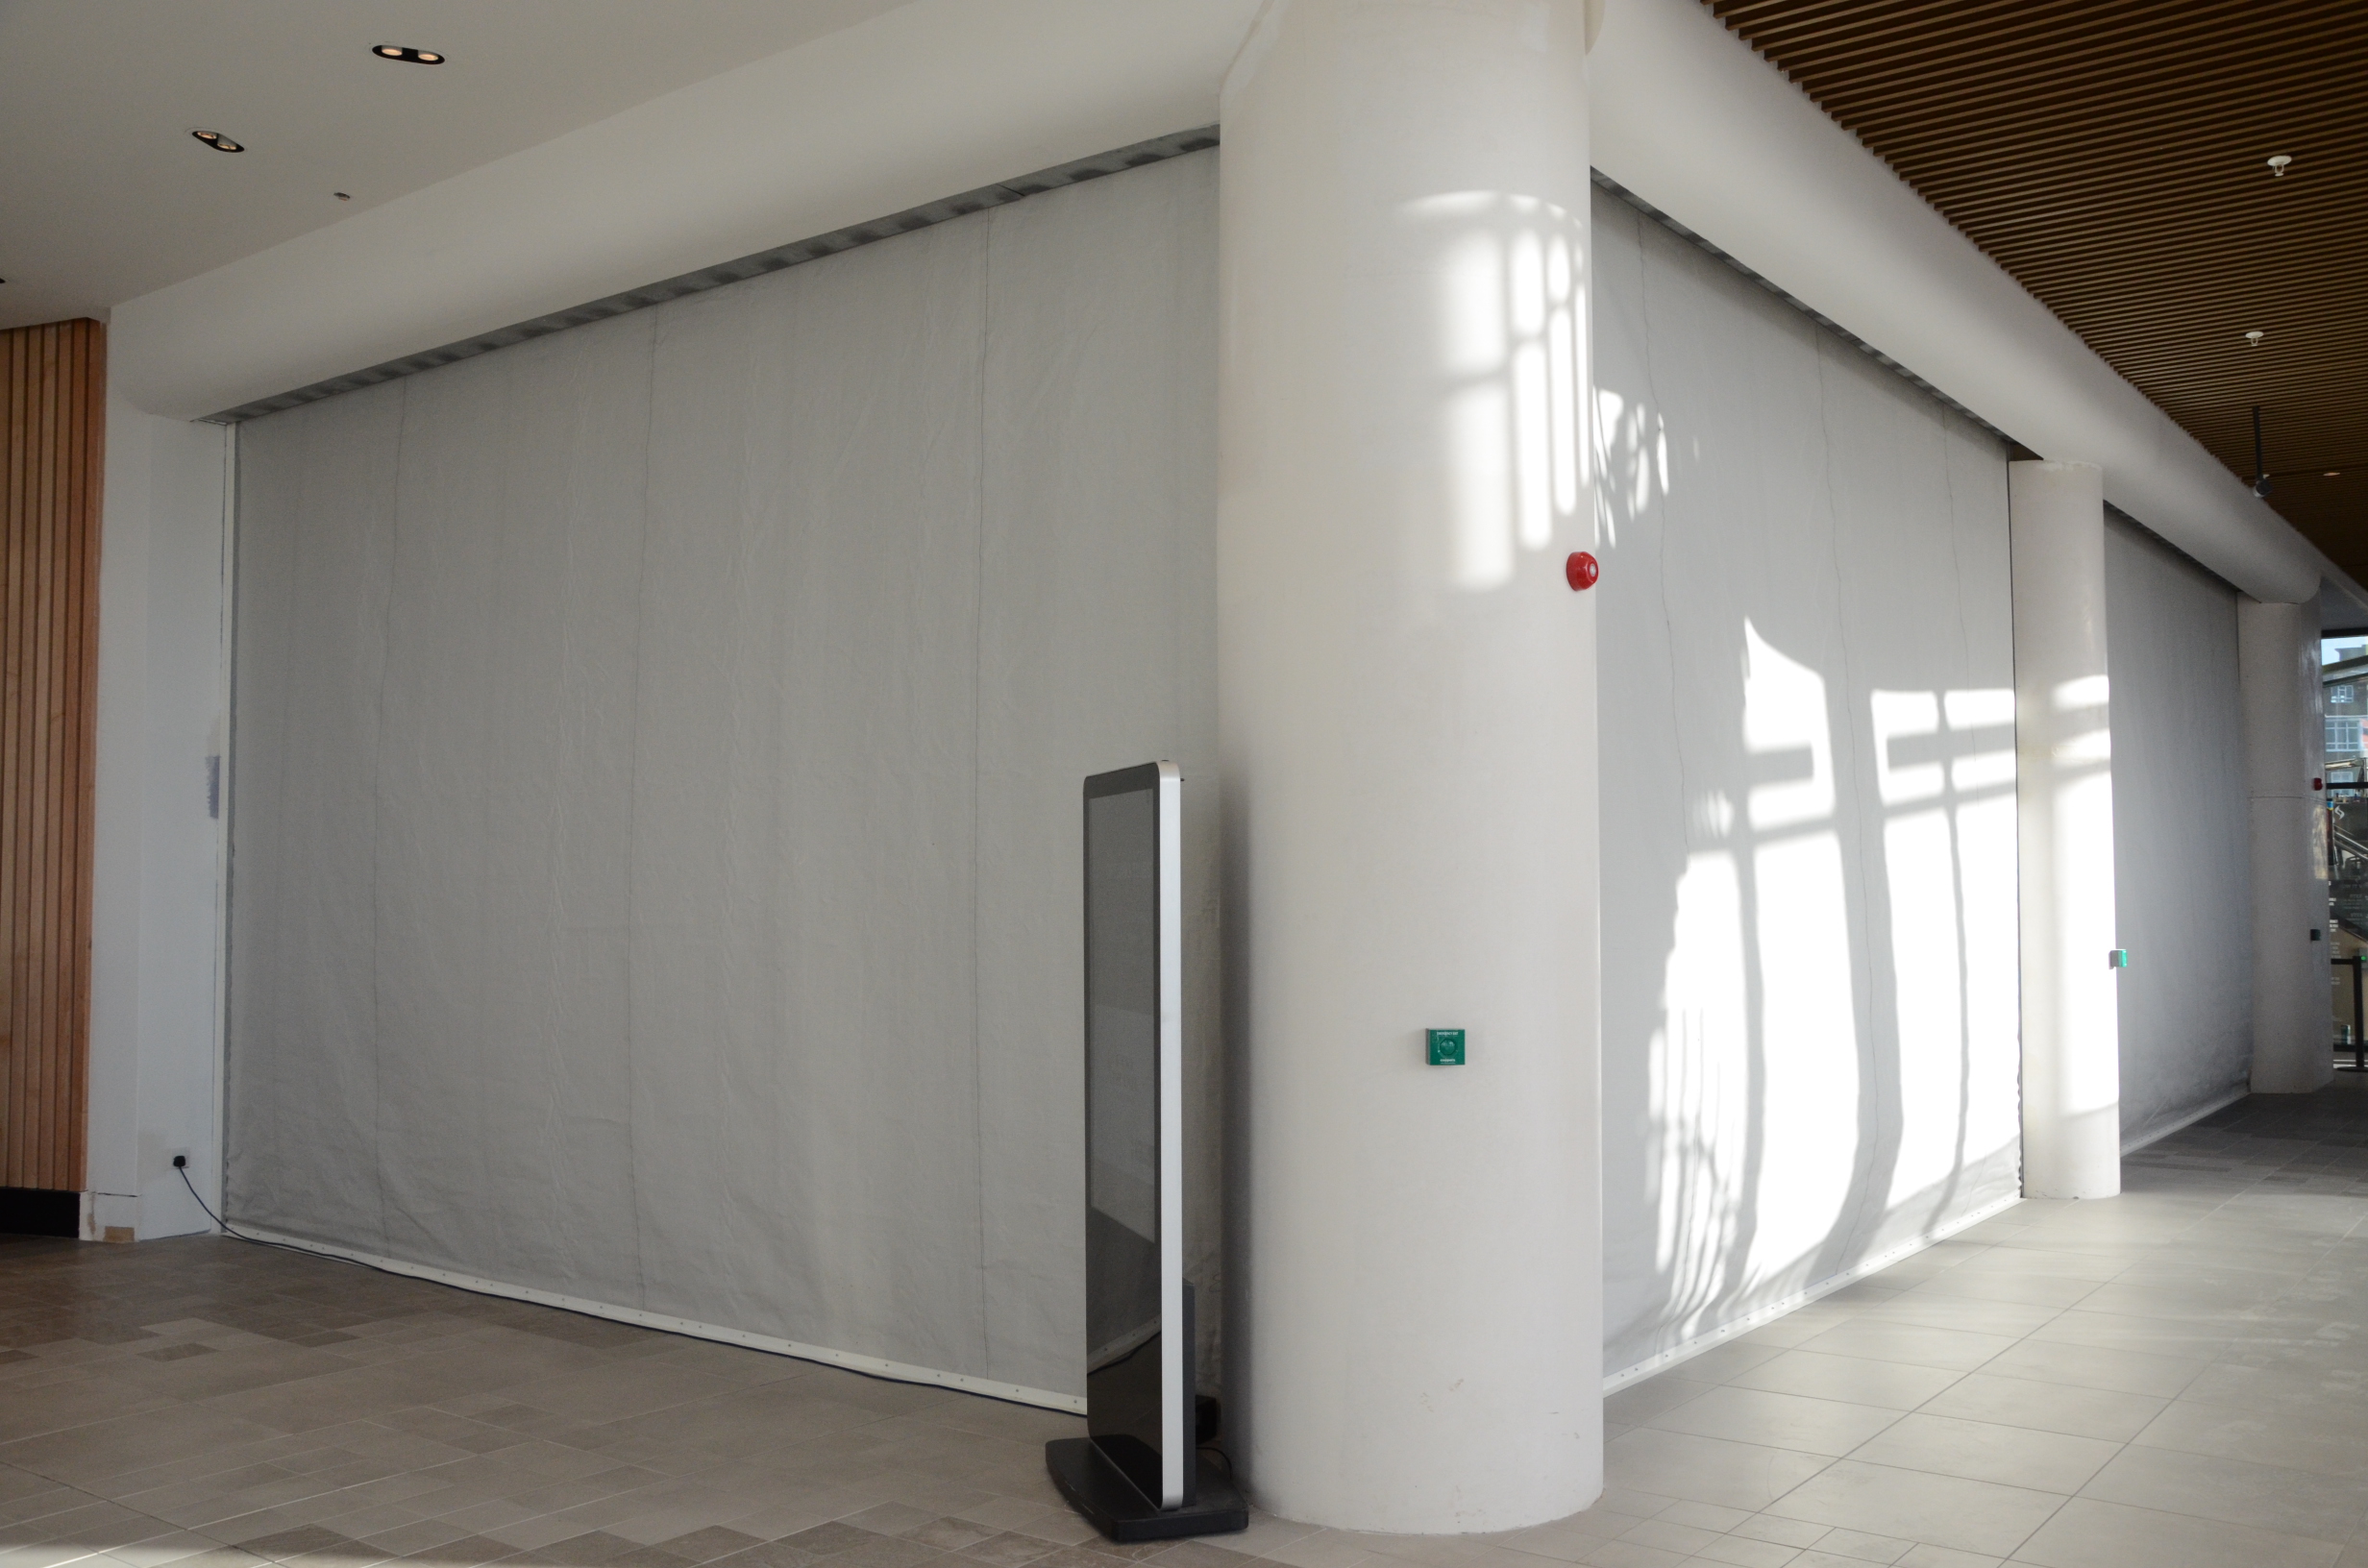 FireMaster Fire curtain at Westquay Southampton